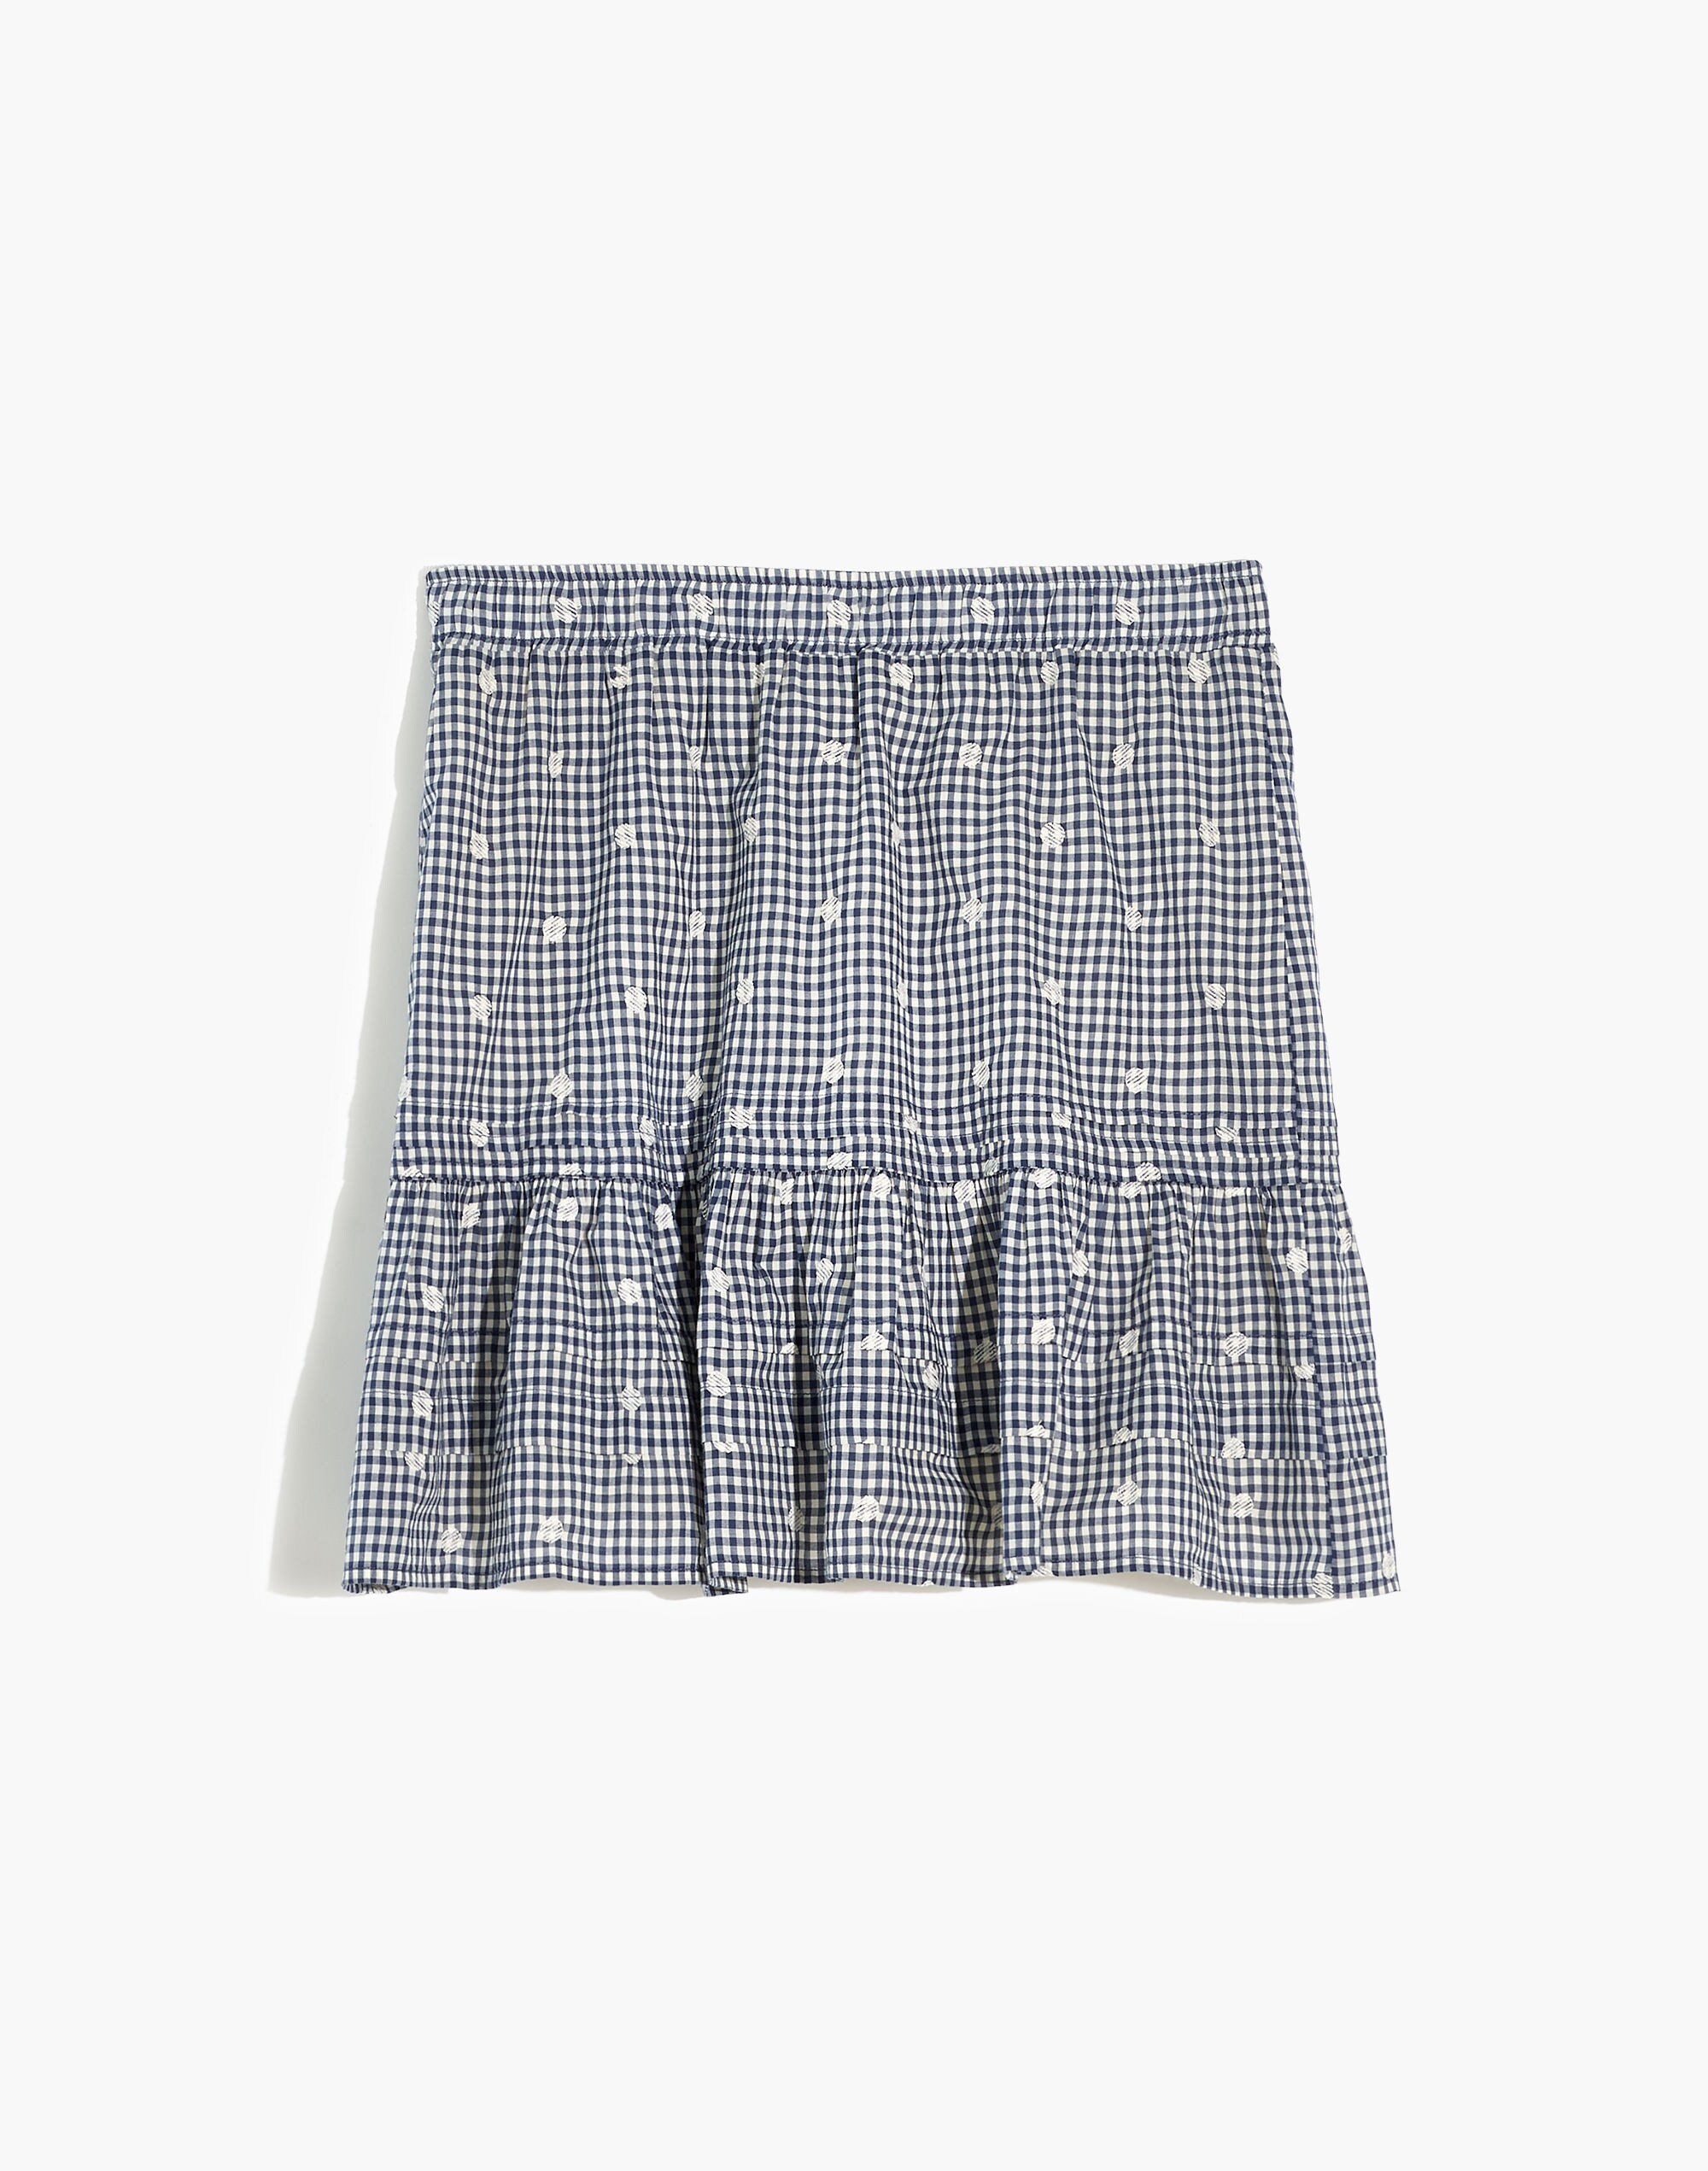 Embroidered Tiered Pull-On Mini Skirt in Gingham Check